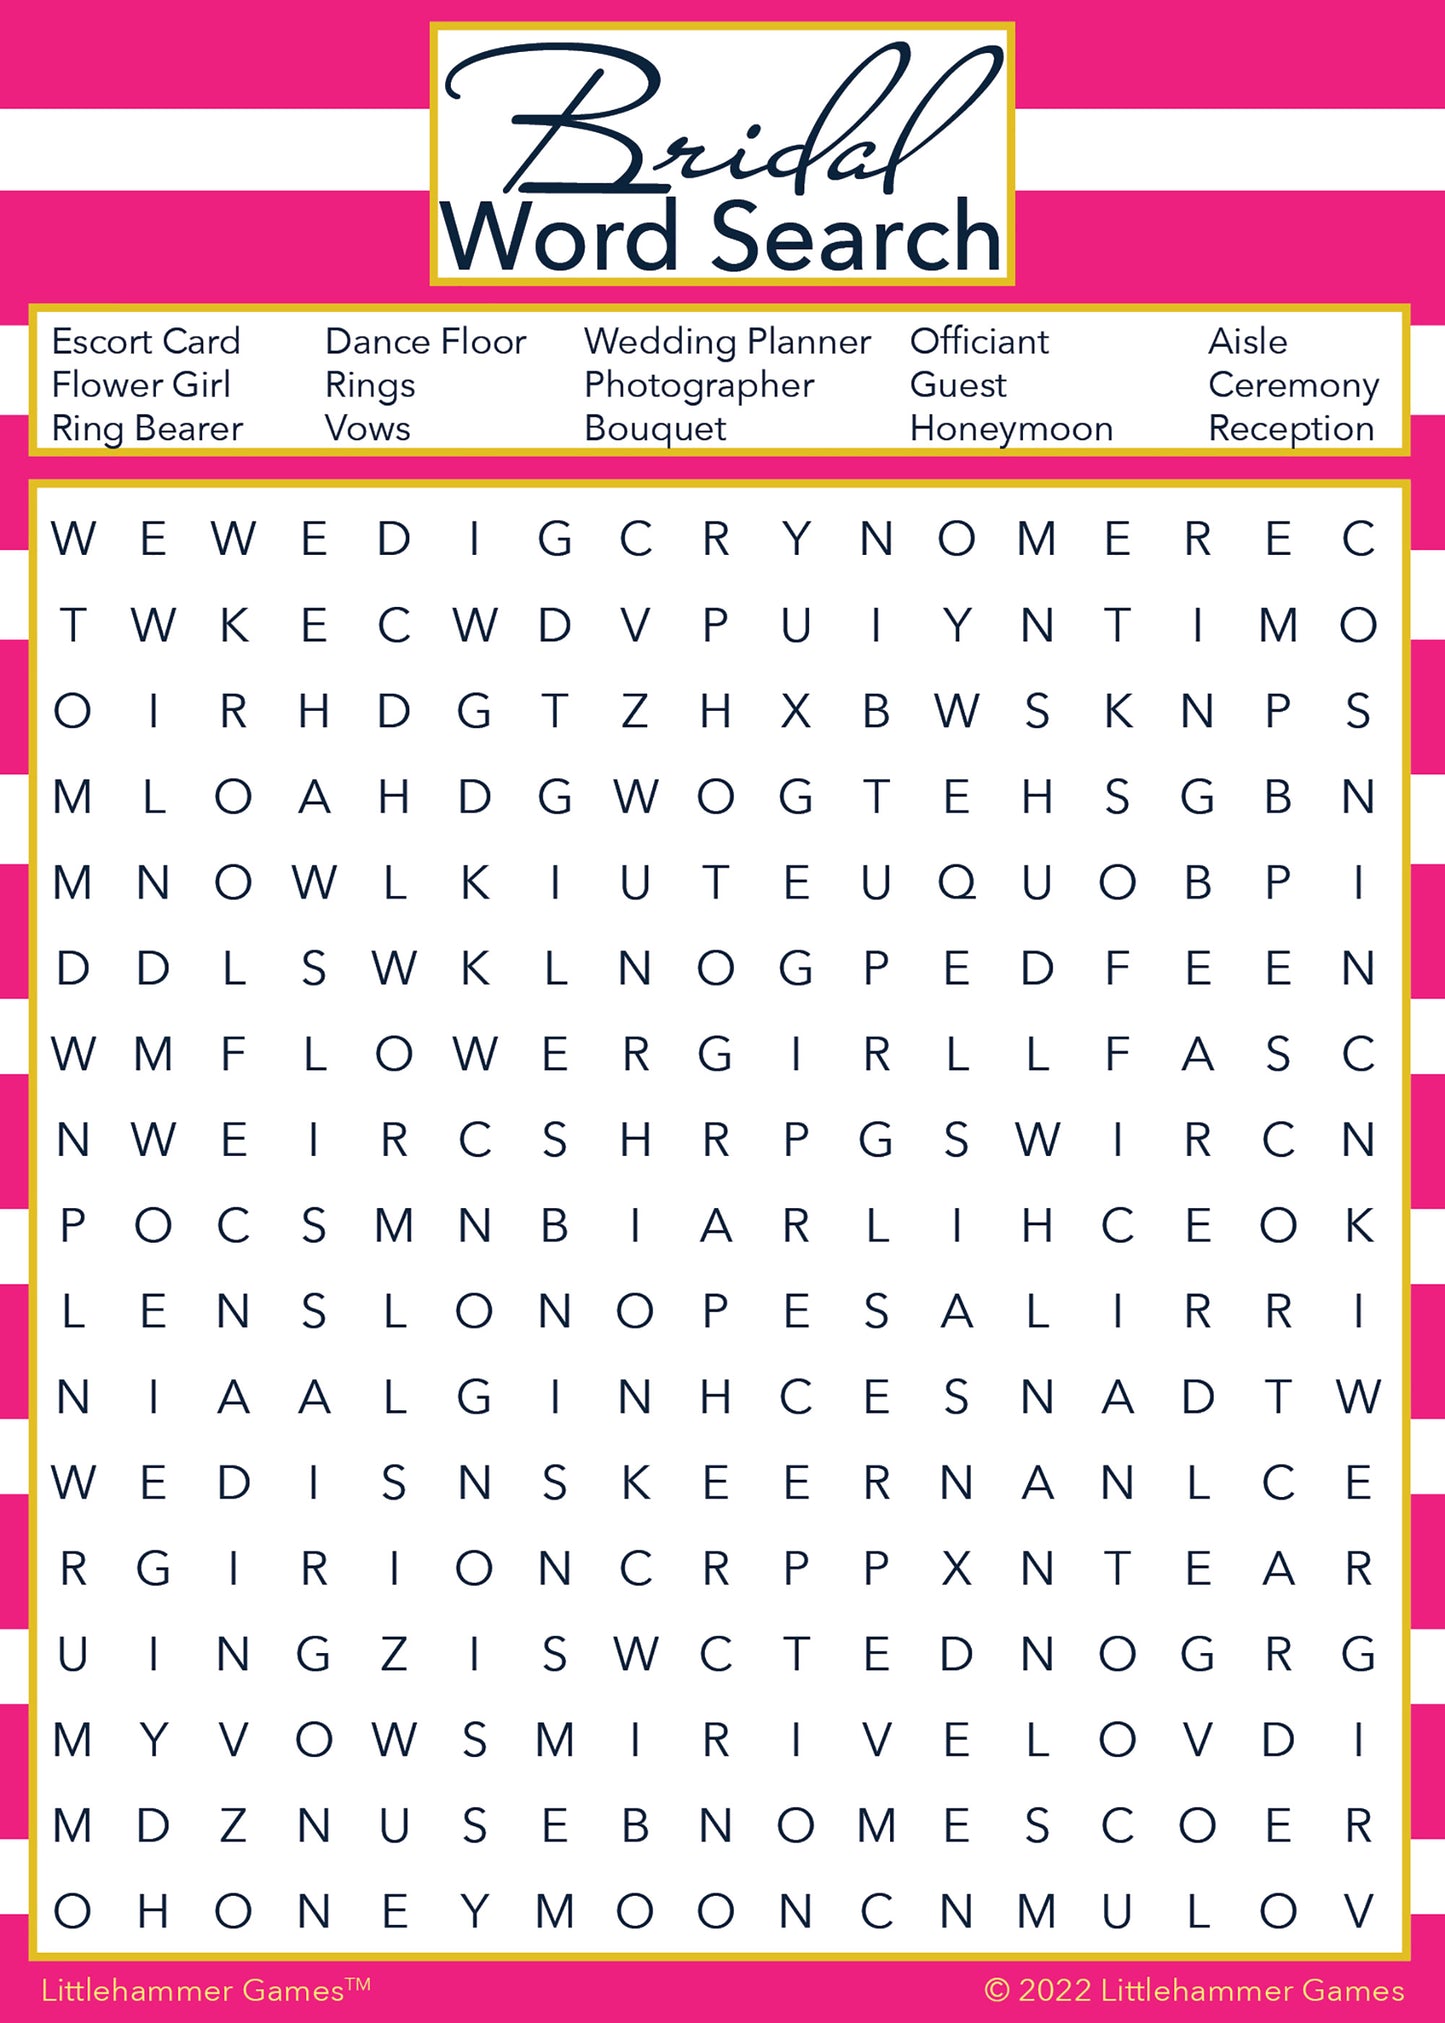 Bridal Word Search game card with a pink-striped background